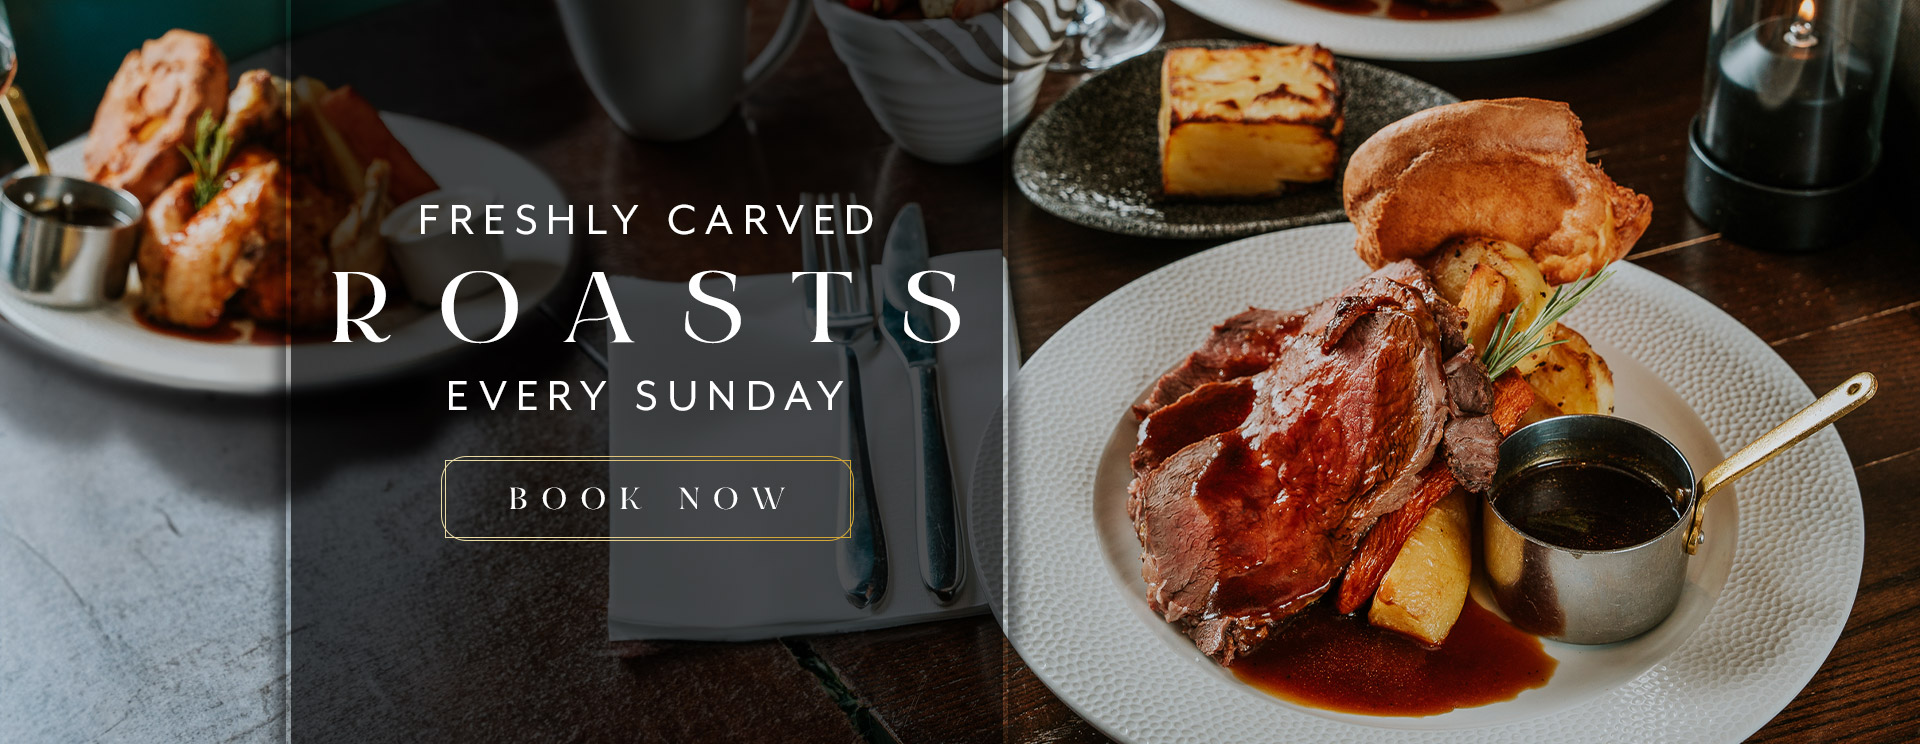 Sunday Lunch at The Black Horse